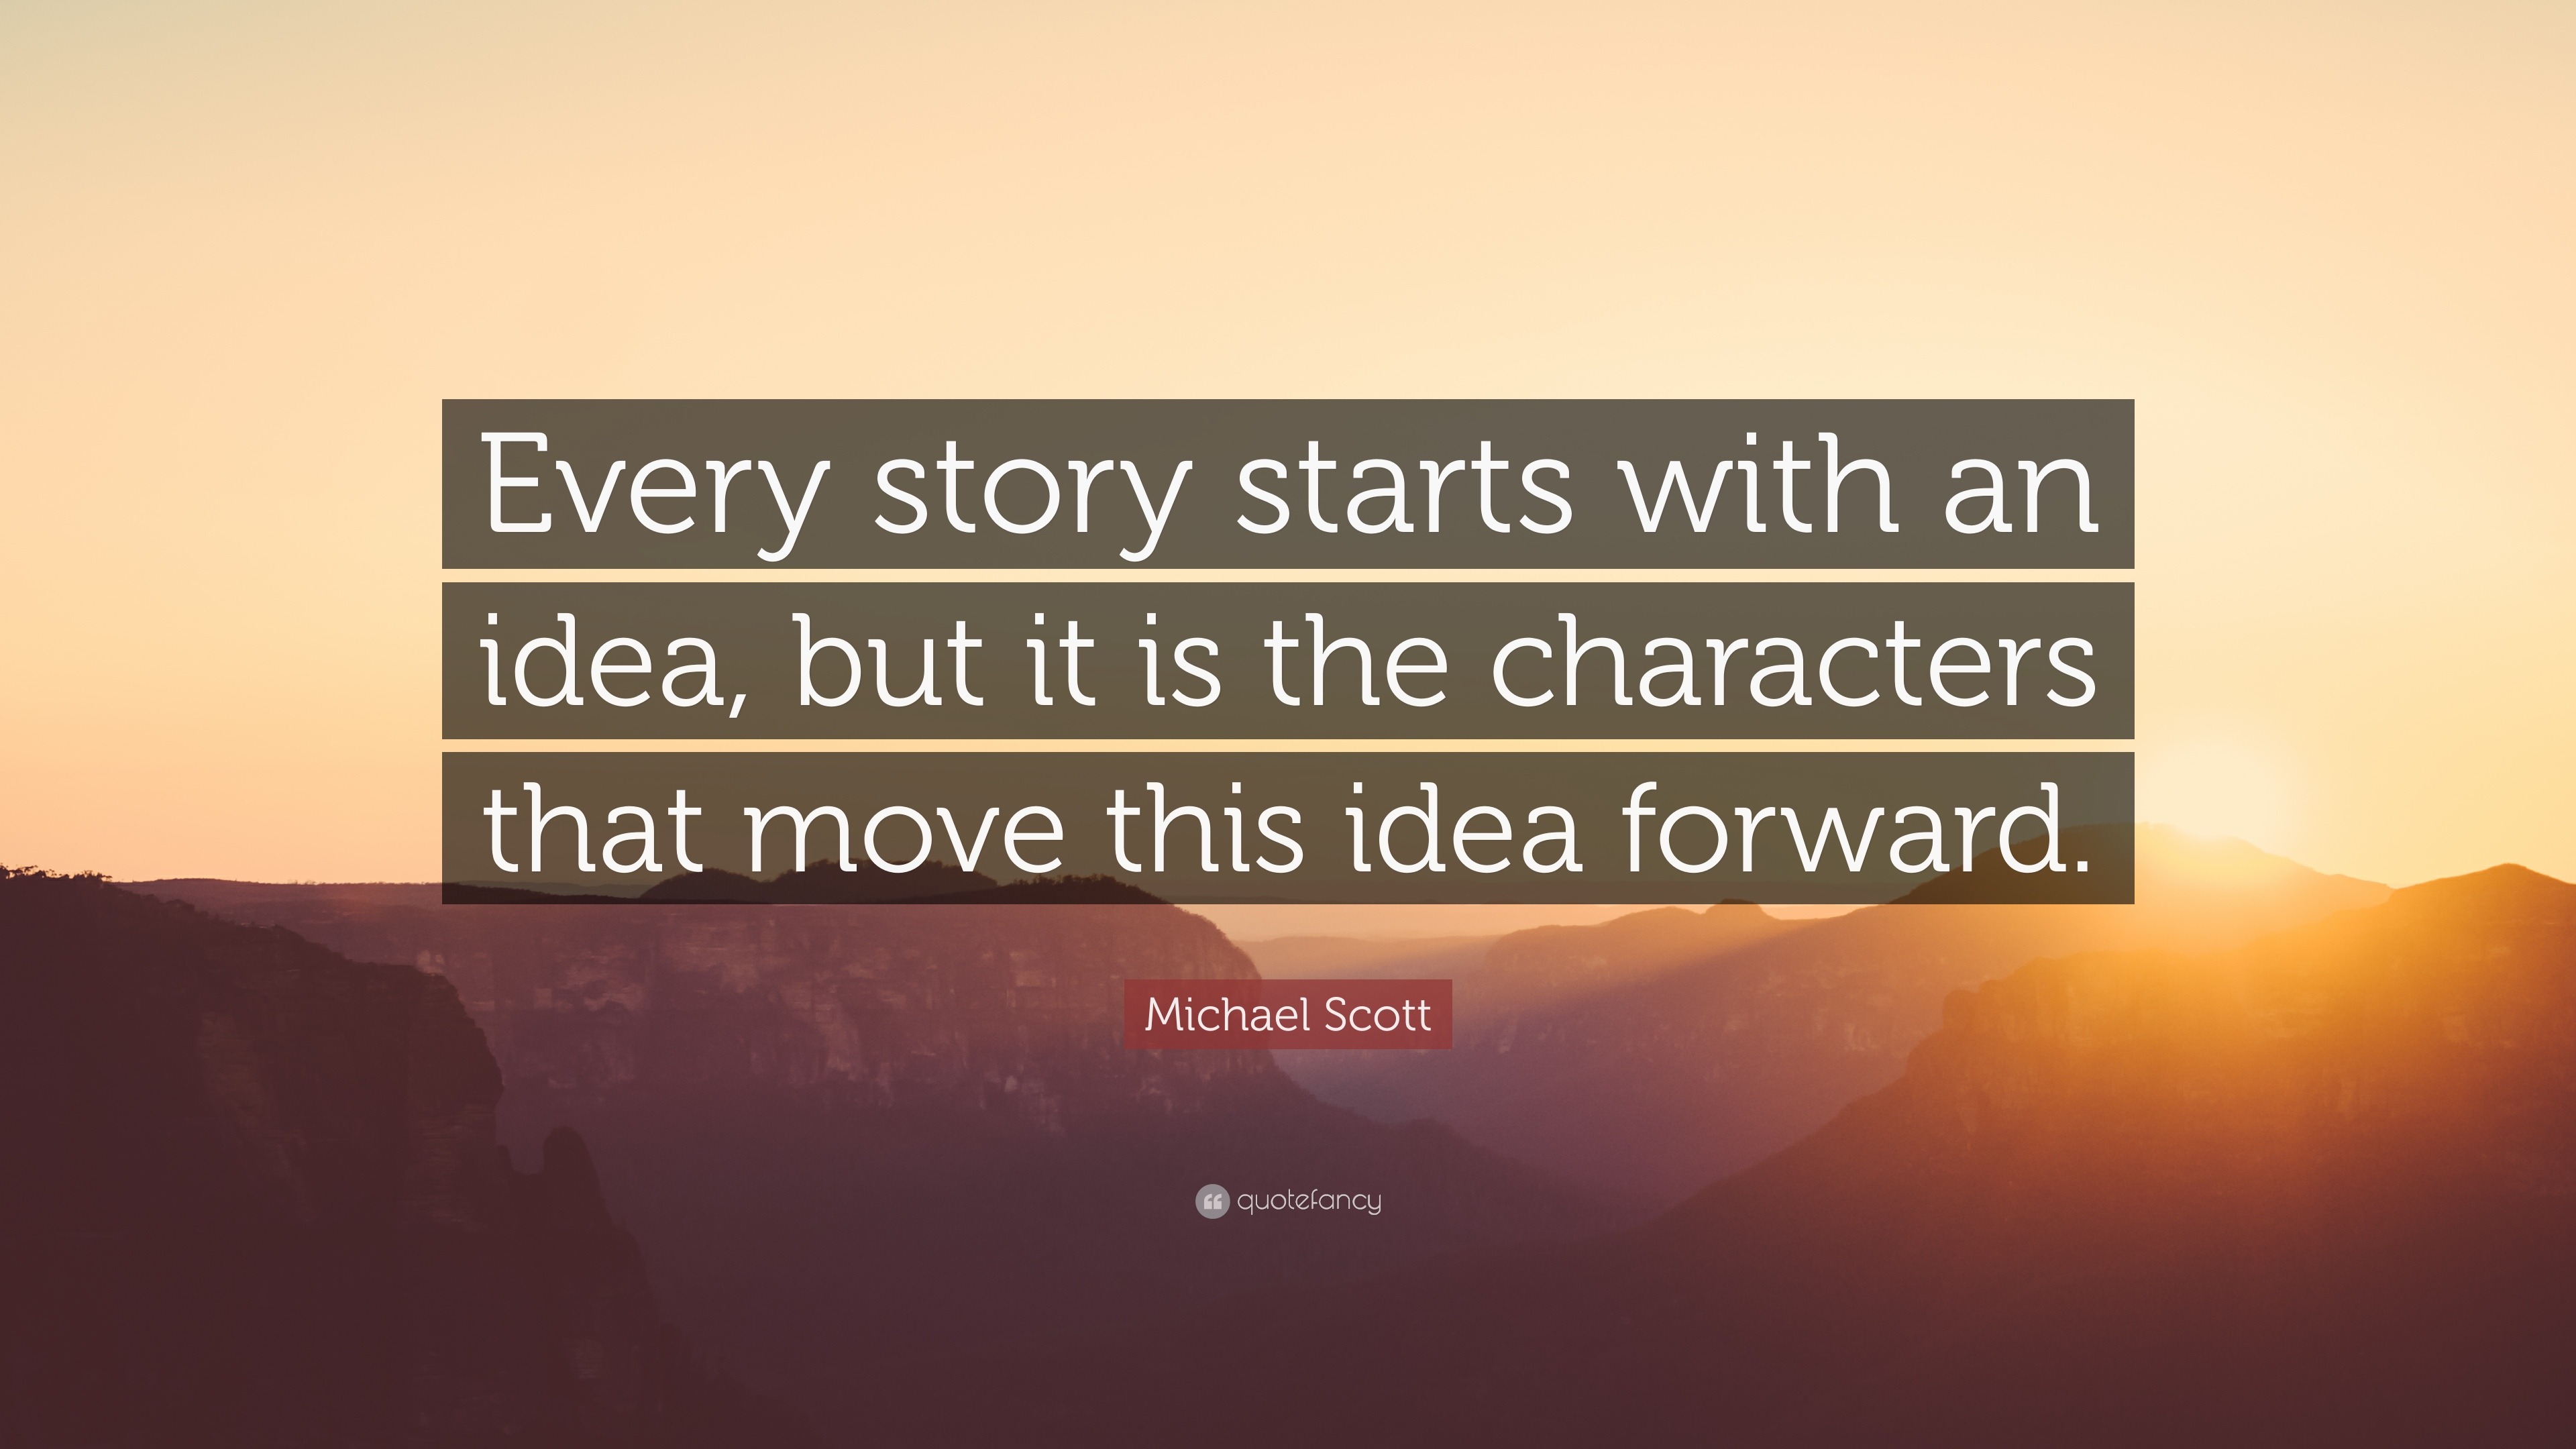 Michael Scott Quote: “Every story starts with an idea, but it is the